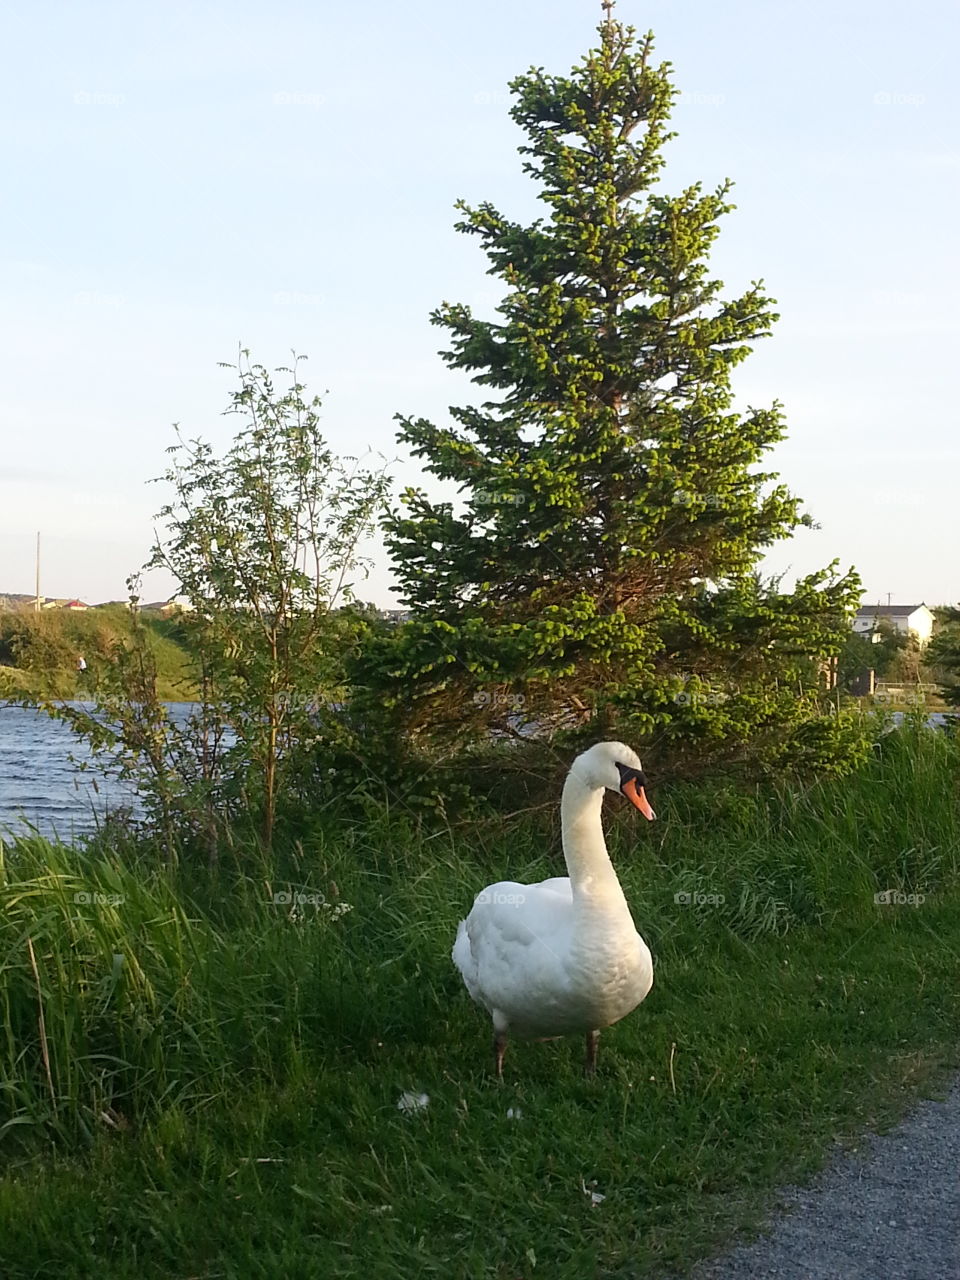 One of Mundy Pond's beautiful swans.